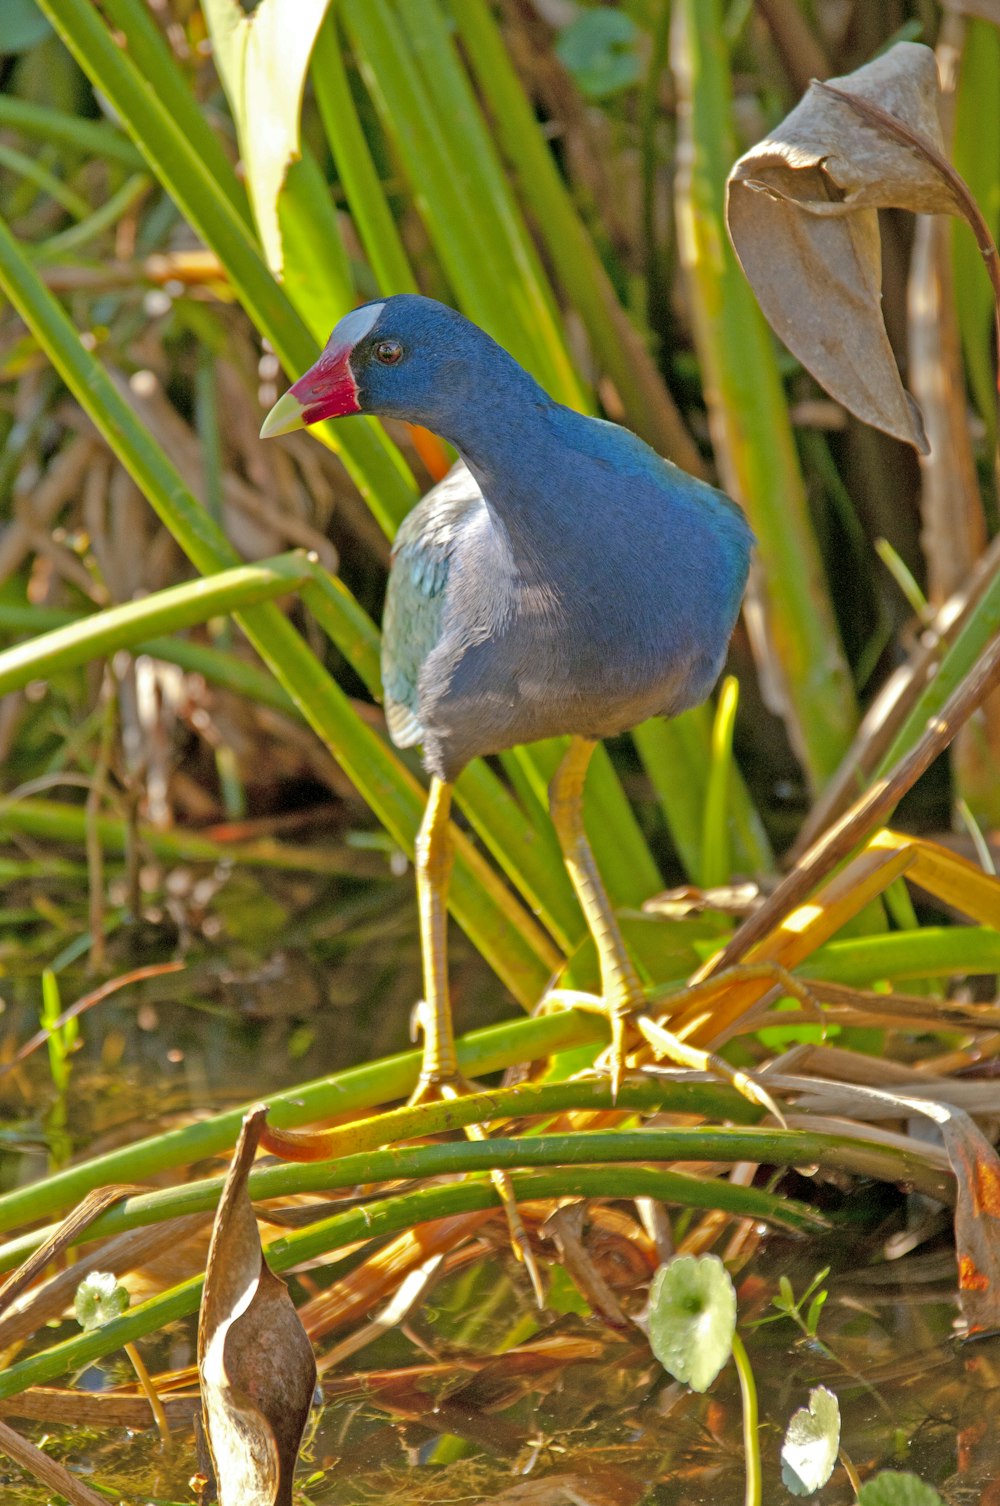 a blue bird standing on a branch in a swamp